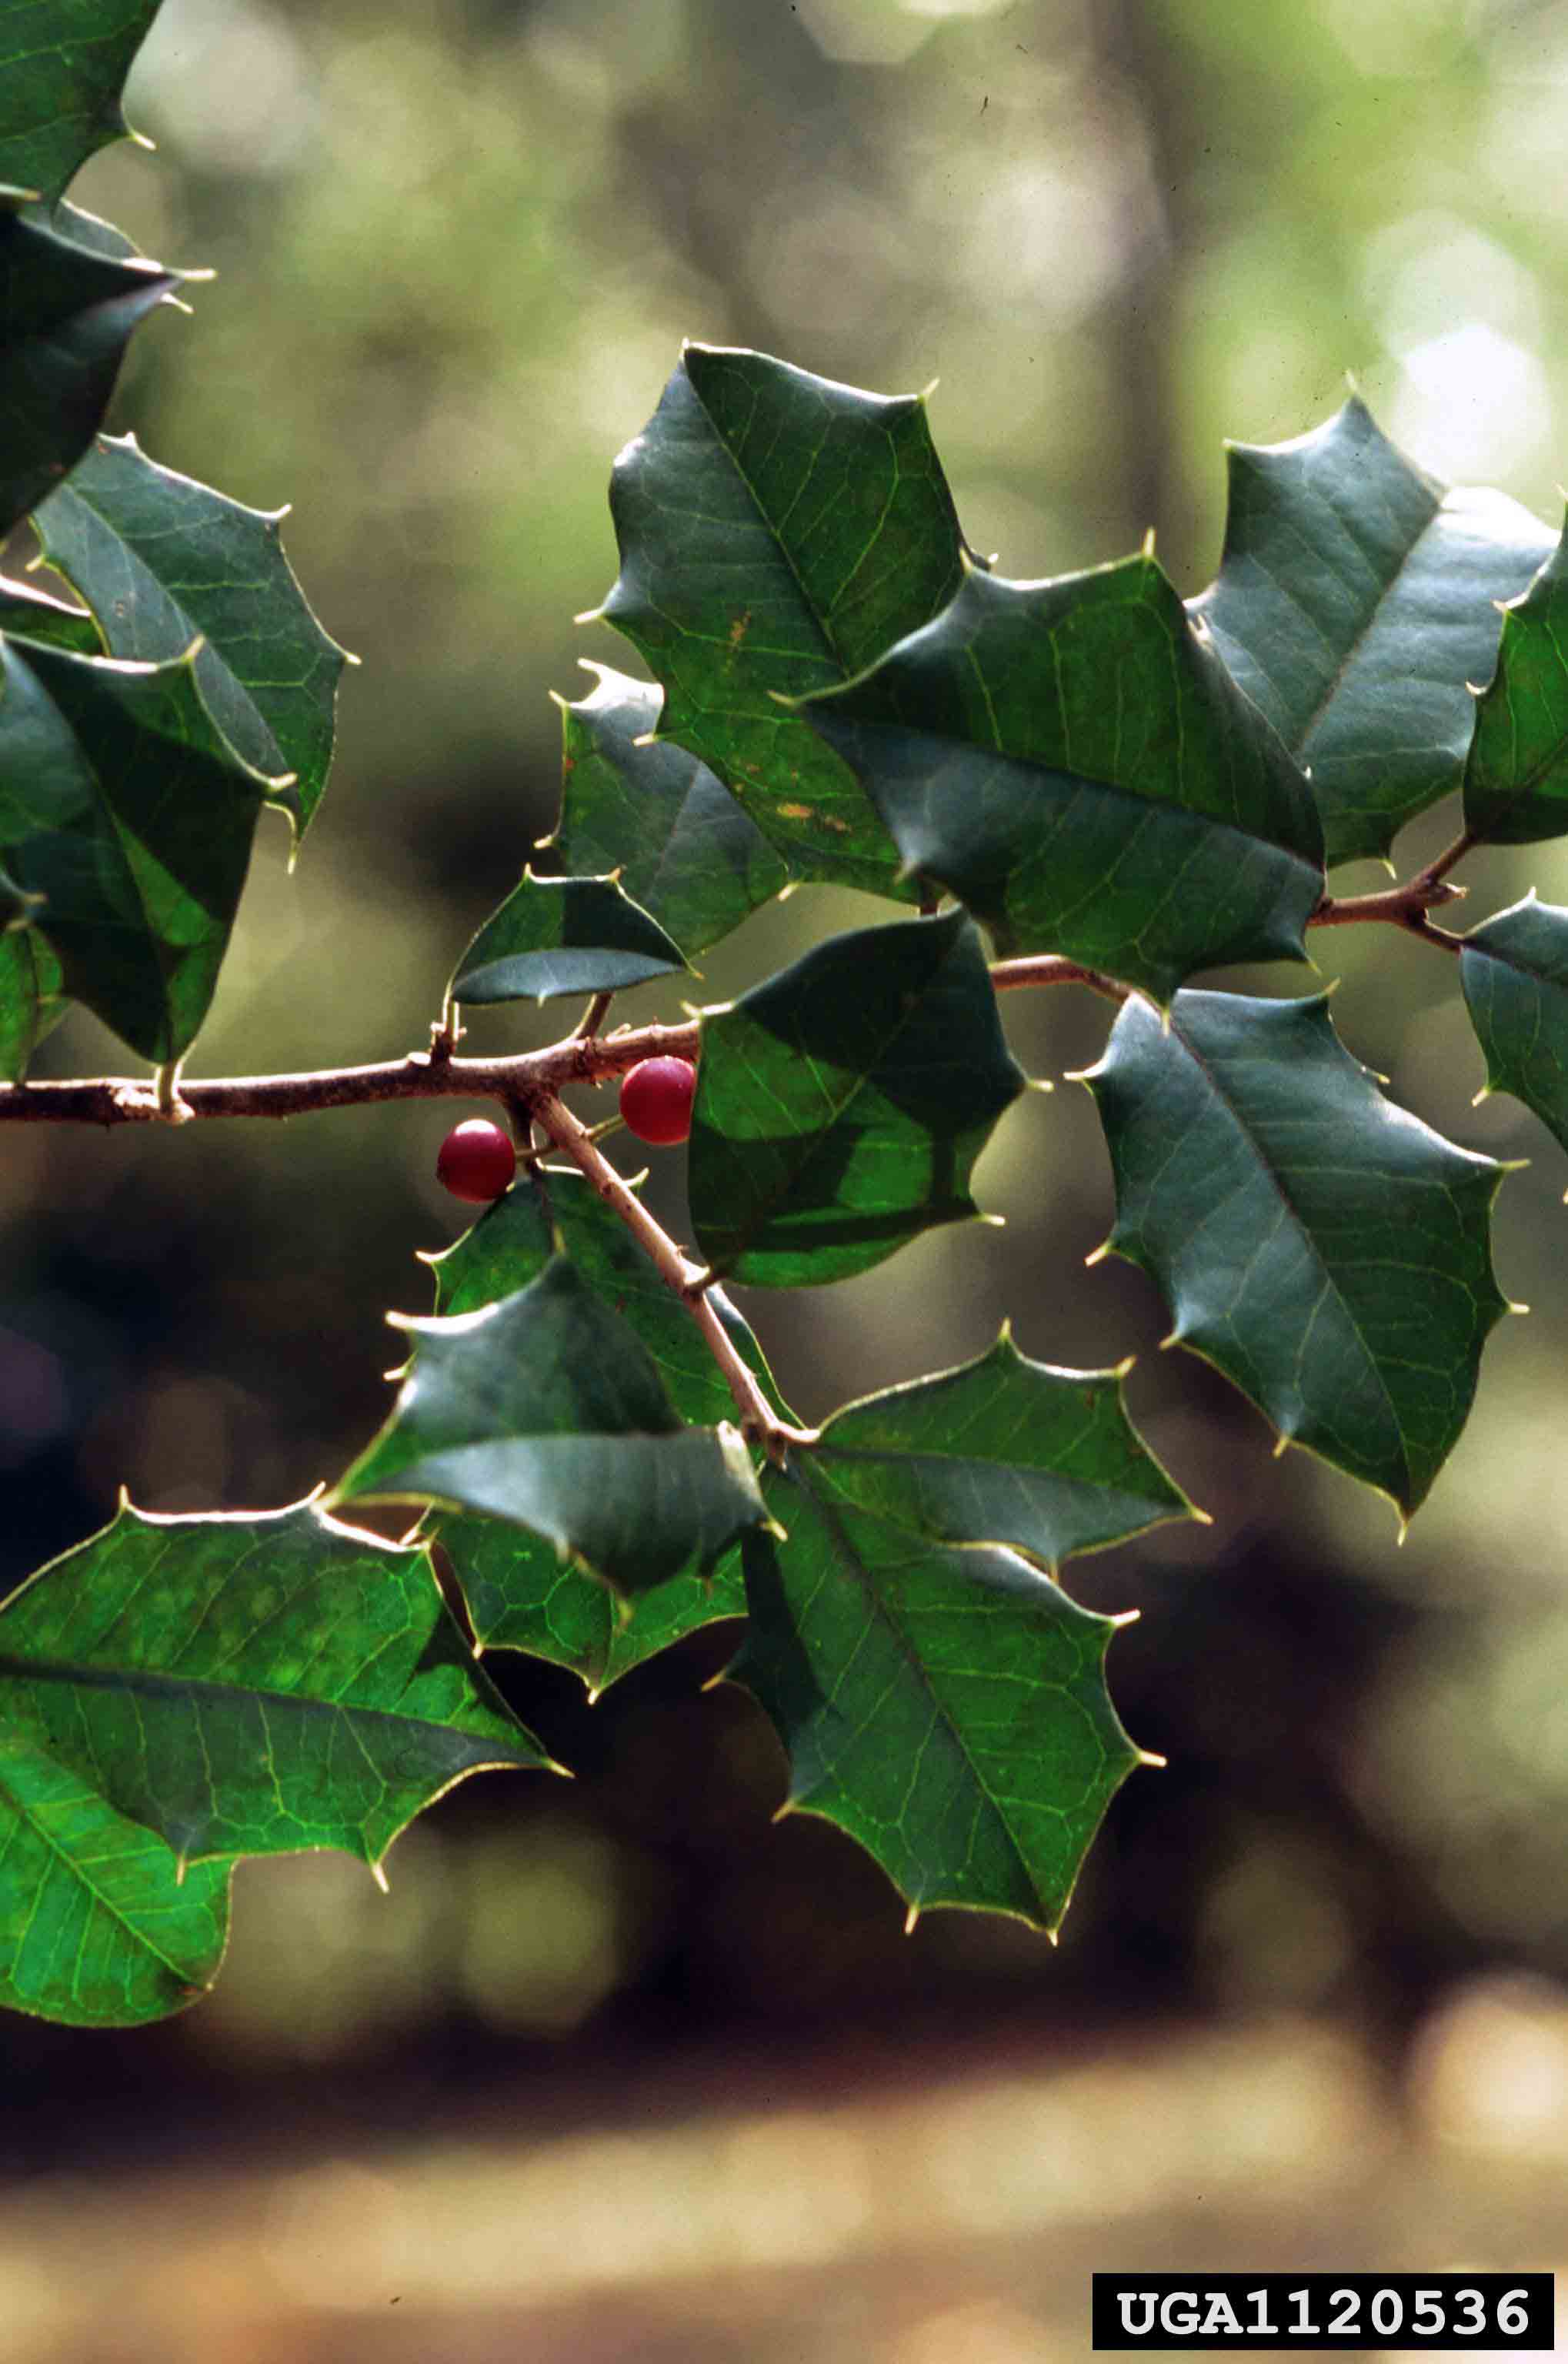 American holly leaves, showing spiny teeth